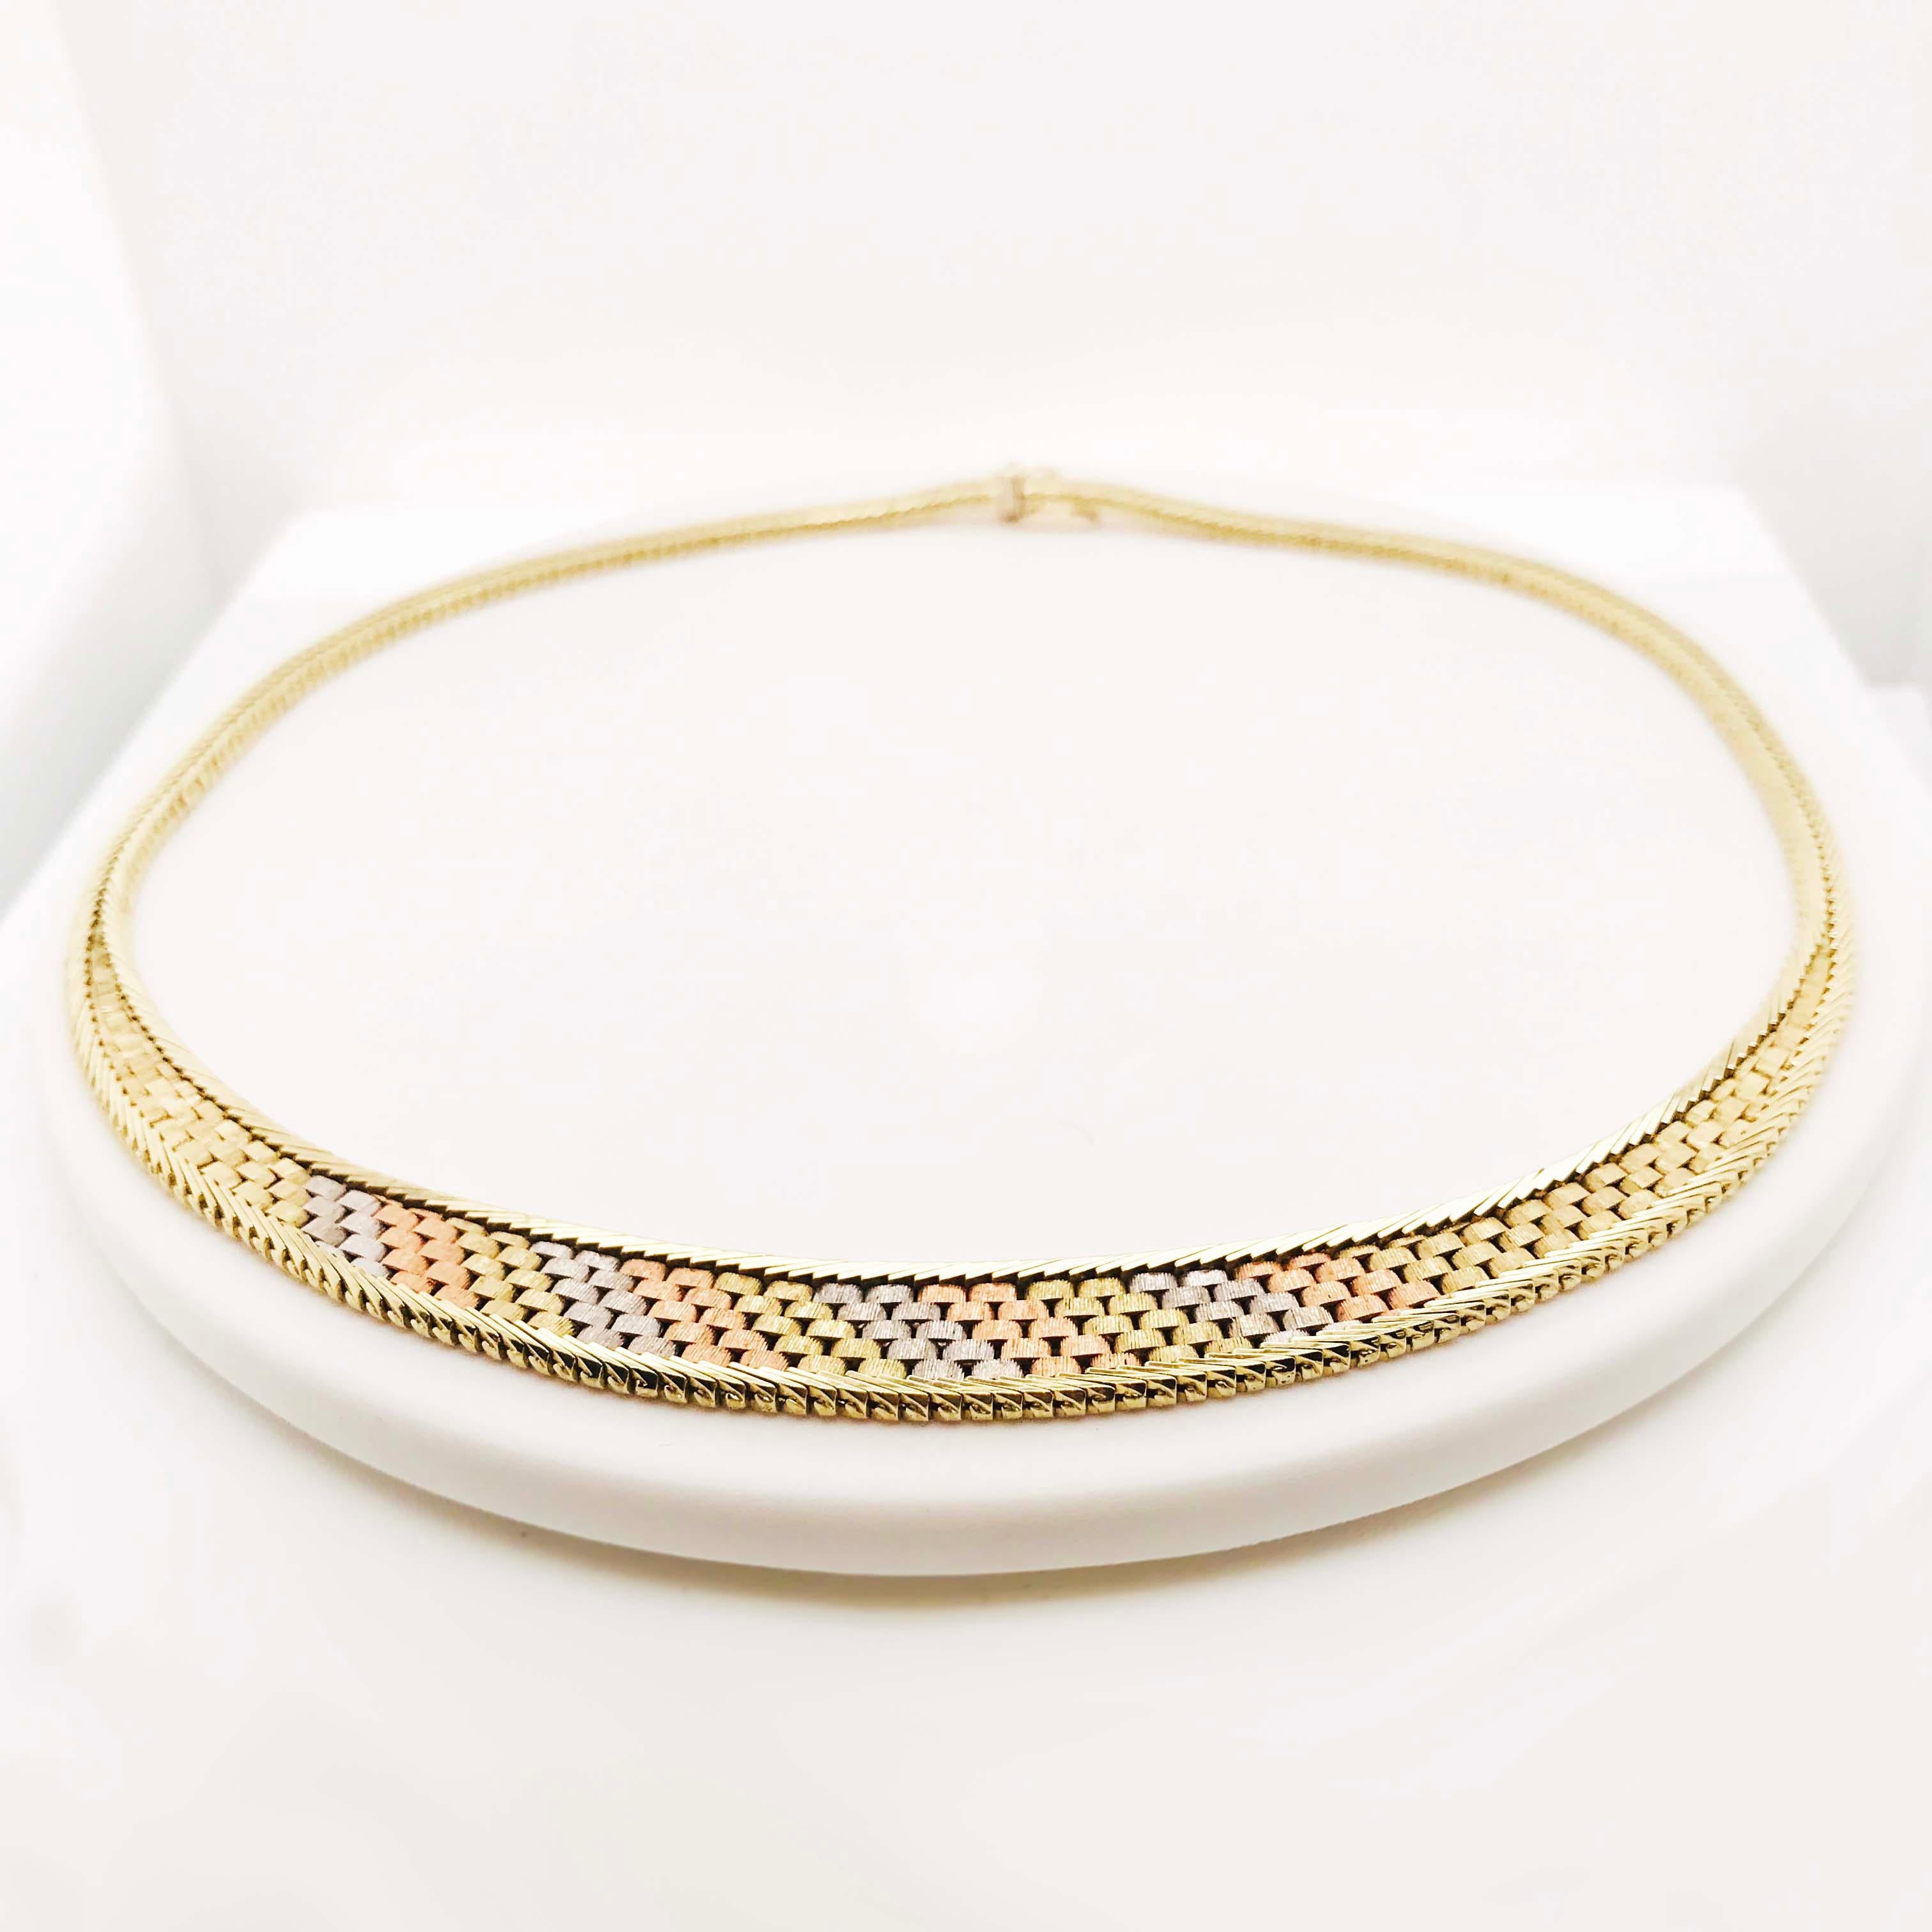 This Tri Colored Gold Choker Chain Necklace is classy and elegant! With 14 Karat Yellow, rose and white gold links that have all been hand fabricated and designed together to form this gorgeous statement necklace. The links have been designed in a